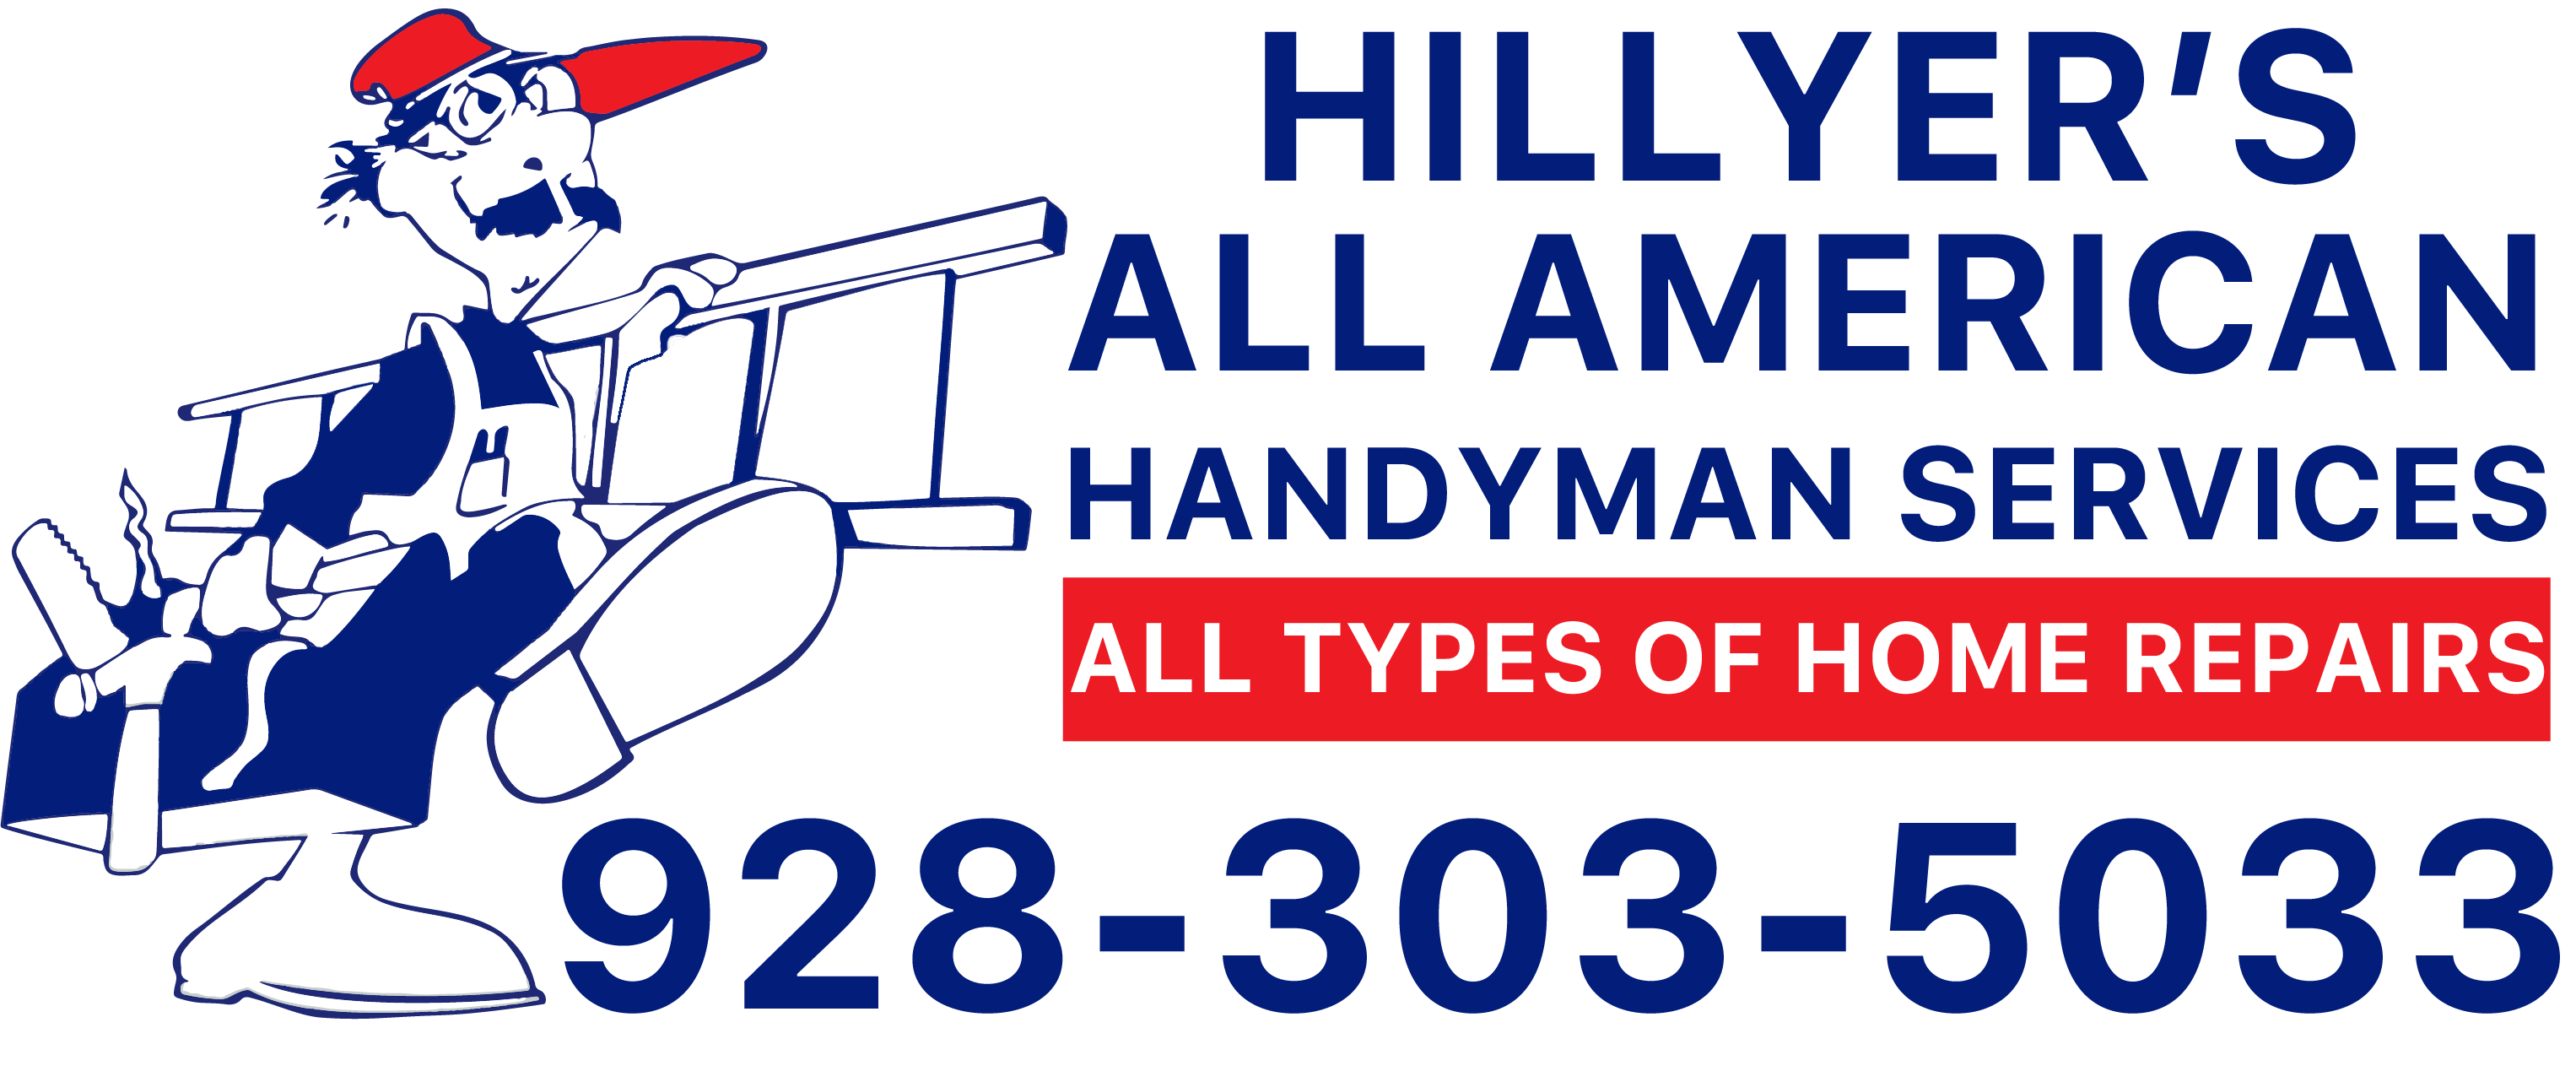 Home Hillyer S All American Handyman Services